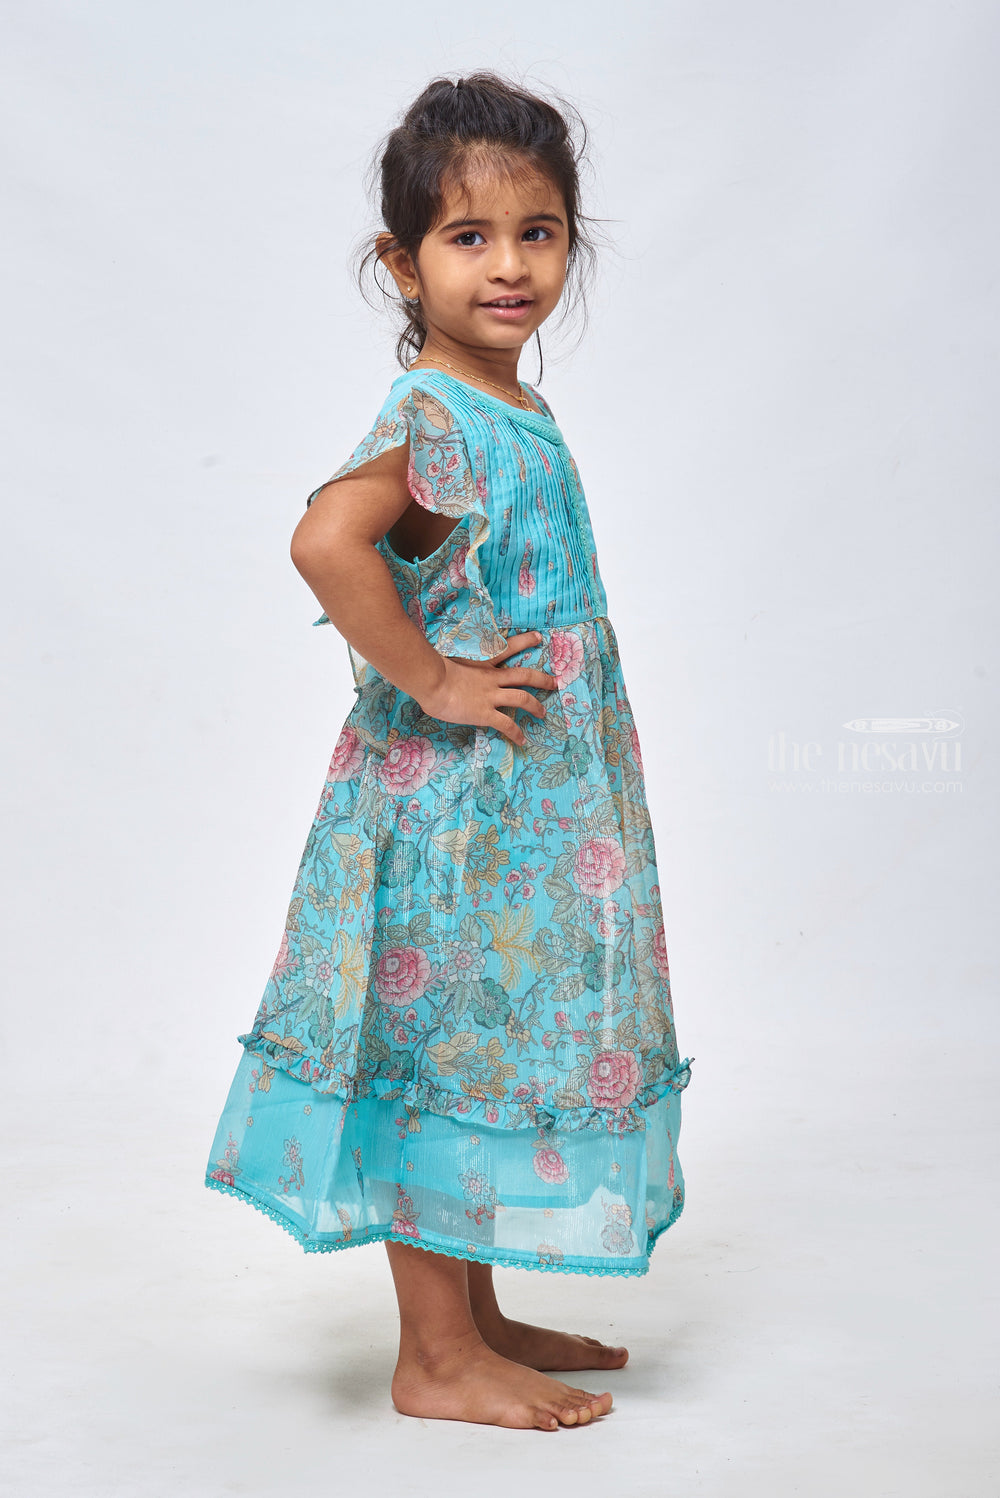 The Nesavu Girls Cotton Frock Pretty in Blue: Girls Flared Floral Cotton Frock Nesavu Beautiful Cotton Frocks for Children | Trendy Designs for Every Occasion | The Nesavu